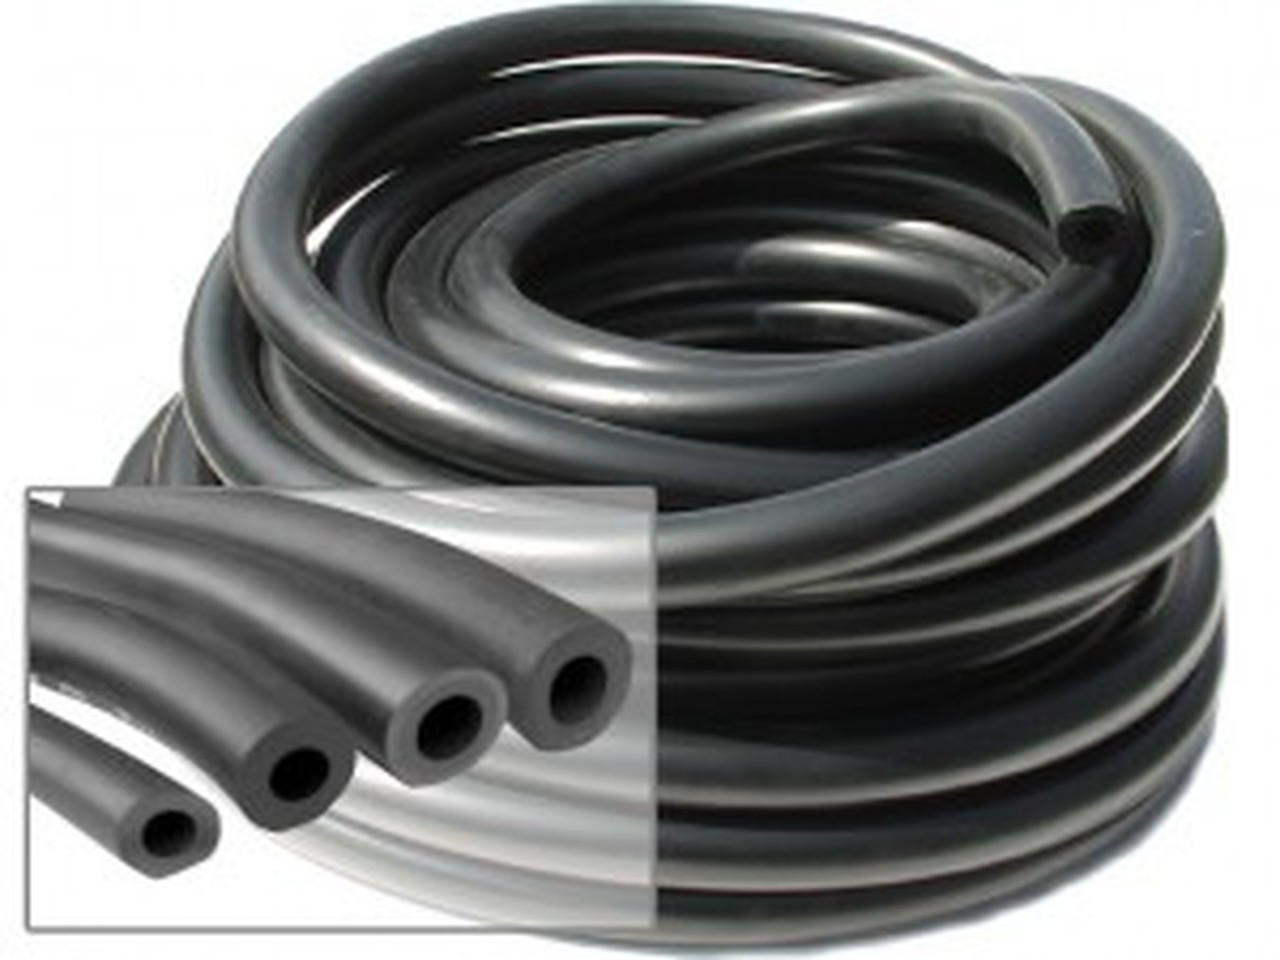 3/8" ID Weighted Airline Tubing - 100 Ft. Roll